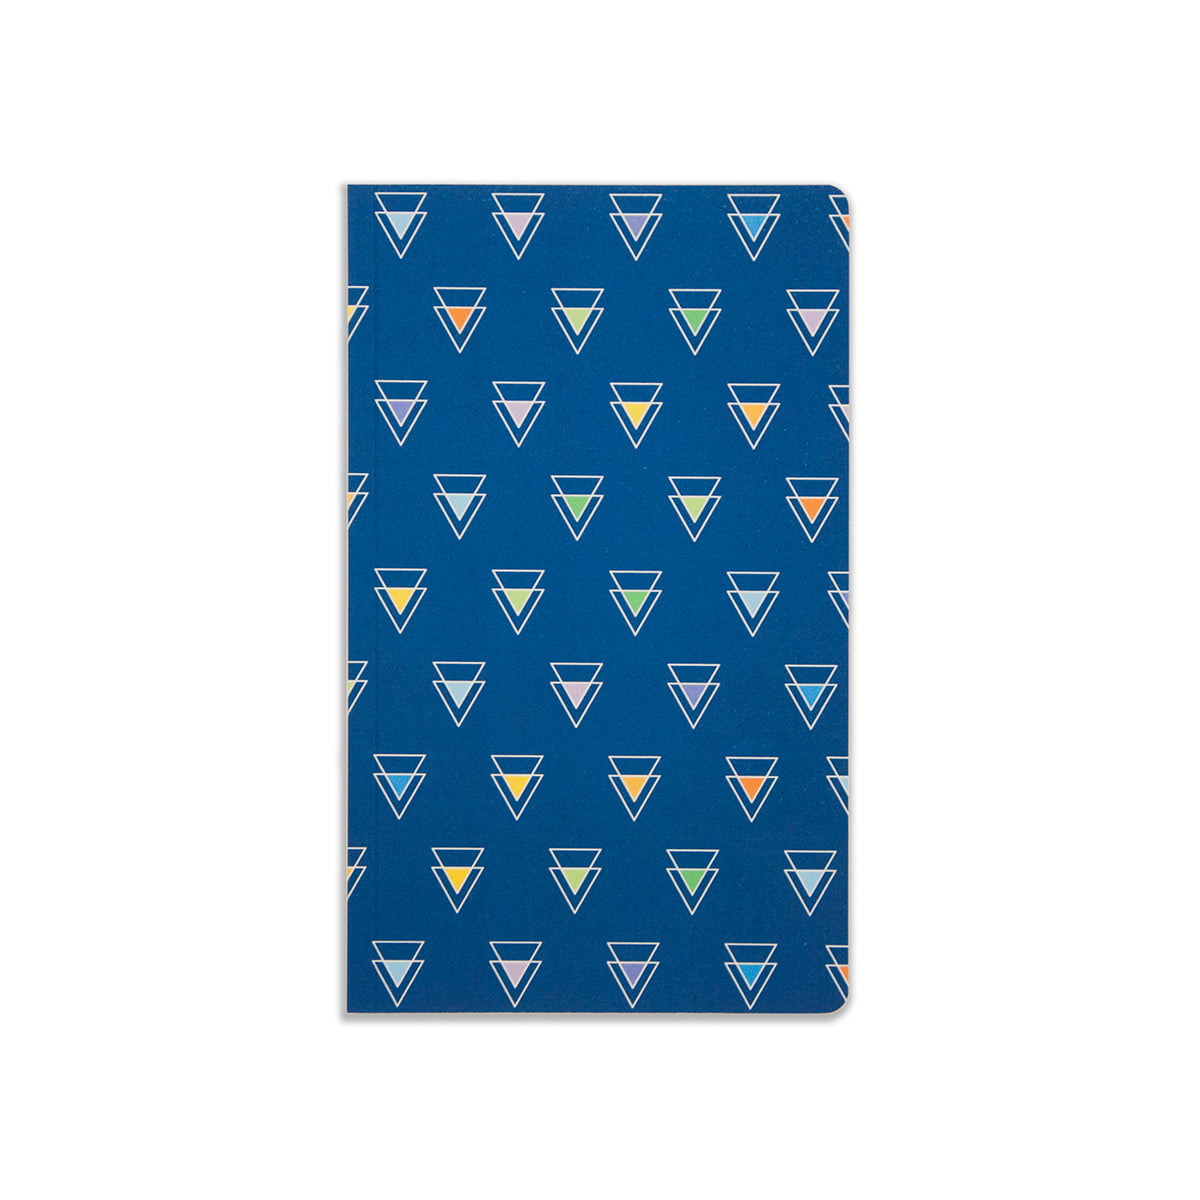 5" x 8.25" soft cover navy notebook featuring overlapping triangle pattern with george brown college colours (yellow, orange, purple, green, blue)